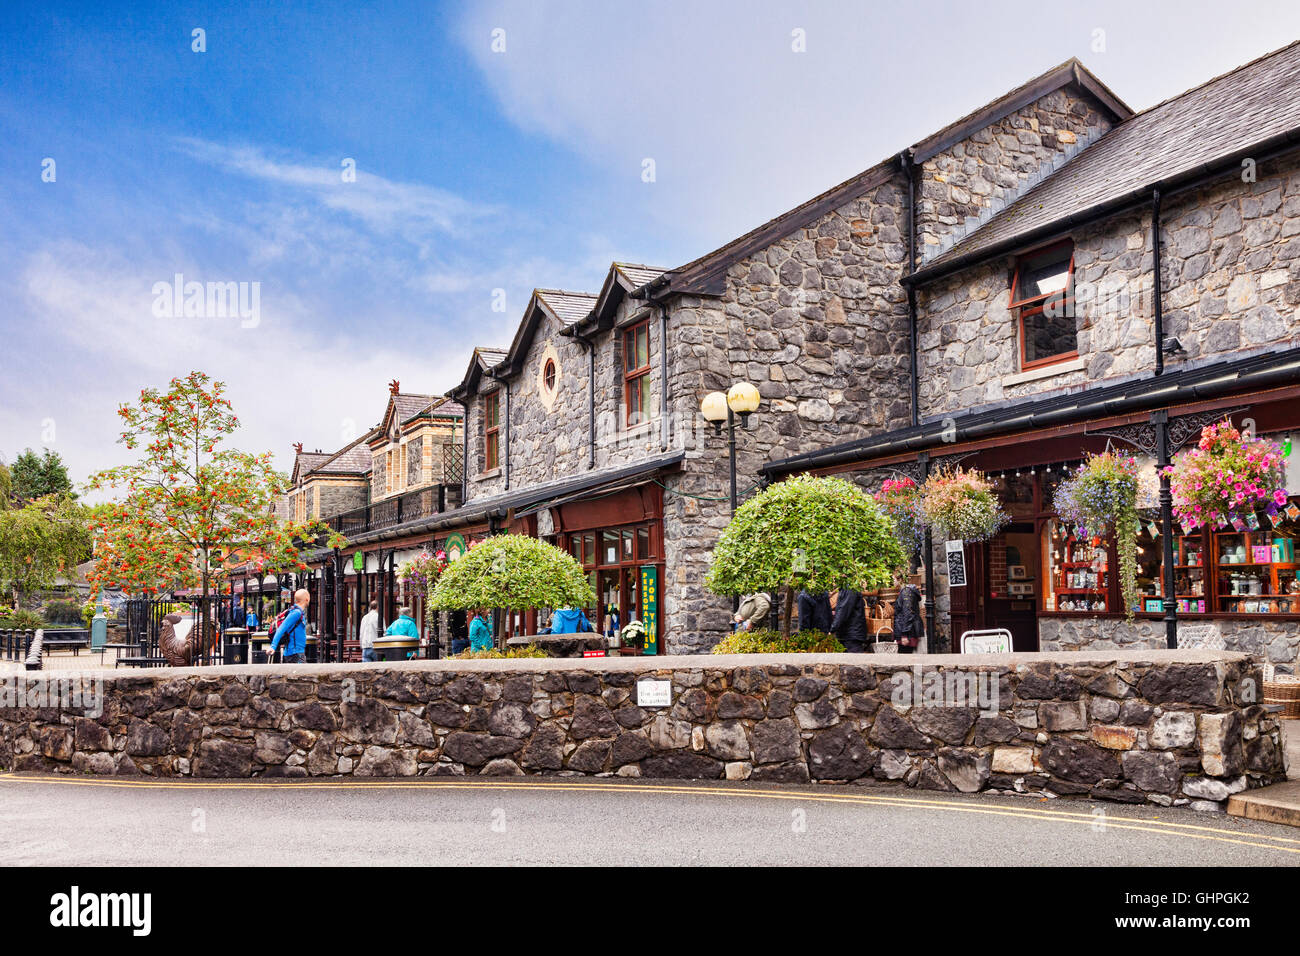 Shopping Mall at , Betws-Y-coed, Conwy, Parc National de Snowdonia, Pays de Galles, Royaume-Uni Banque D'Images